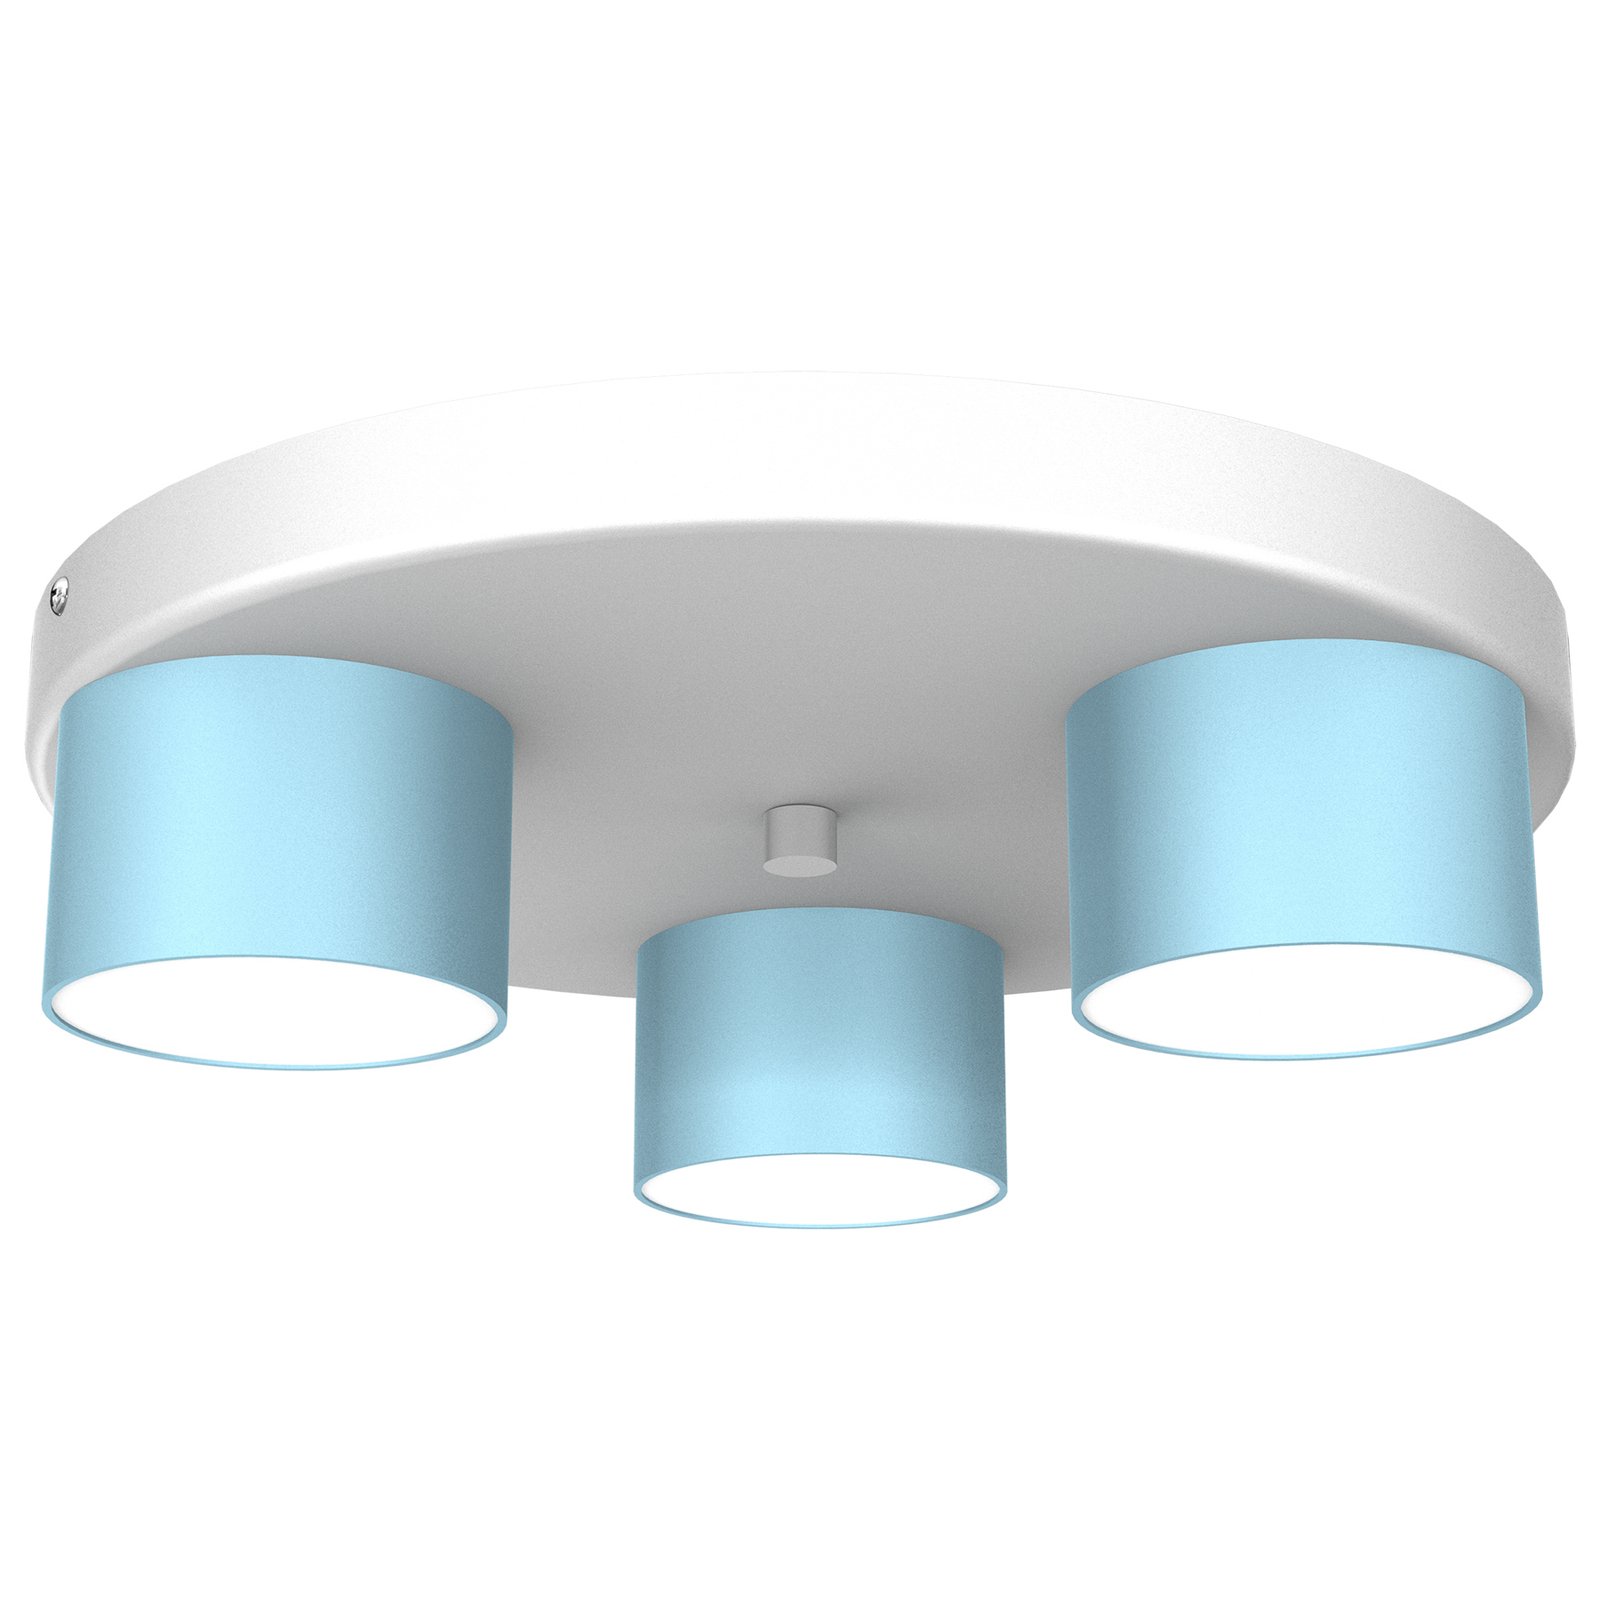 Cloudy round ceiling light 3-bulb blue